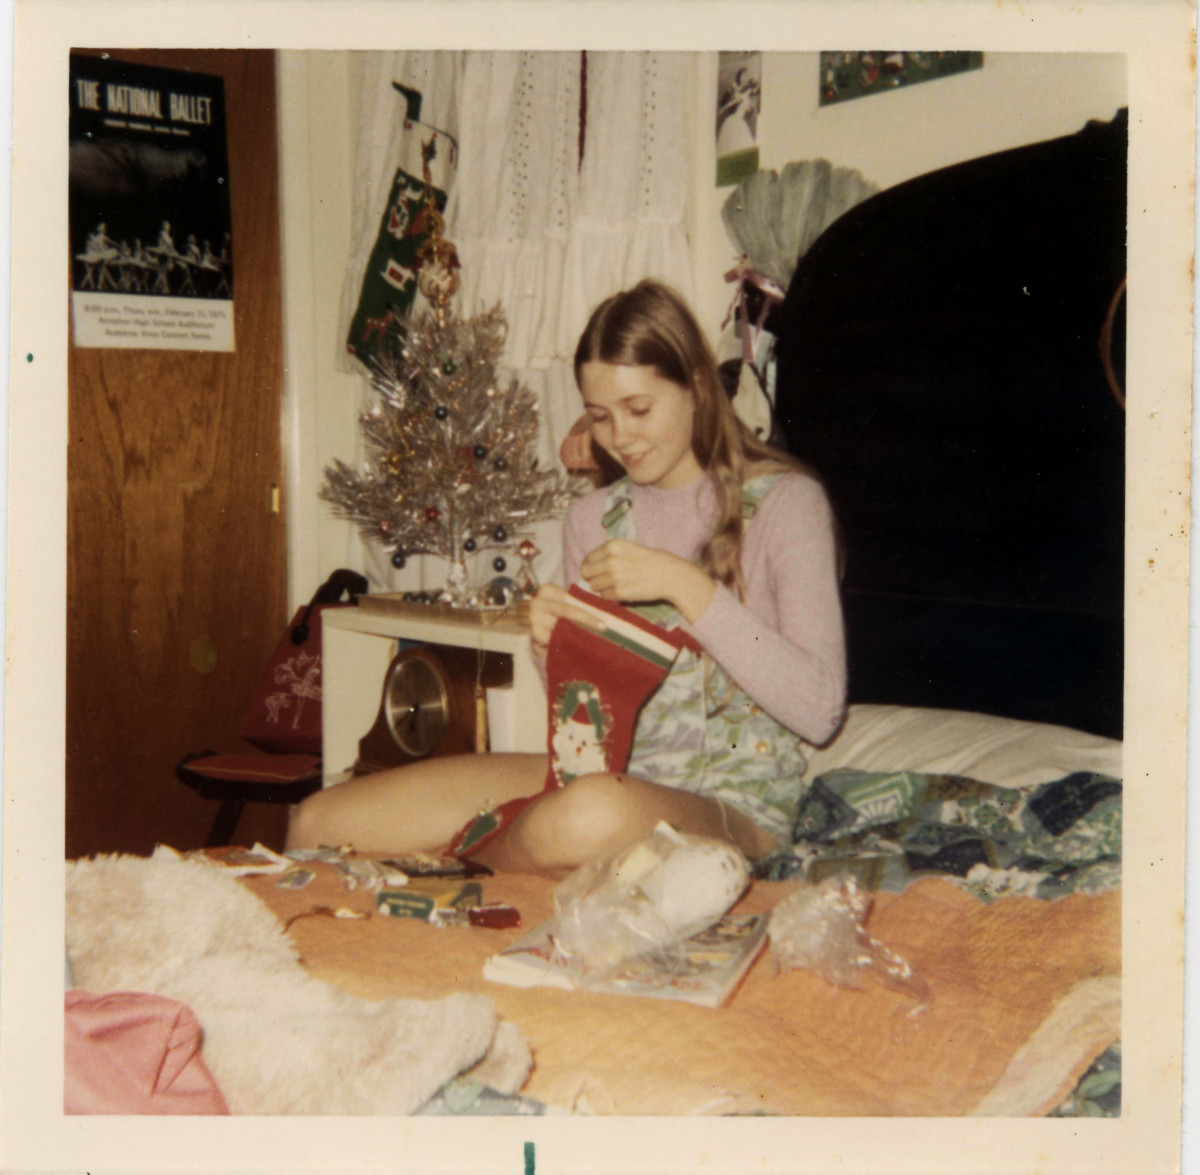 Me in the bedroom I shared with Melanie, celebrating Christmas in the '70s. Note the ballet poster on my closet door, the ballet bag in the chair, and the ballet picture on the wall!